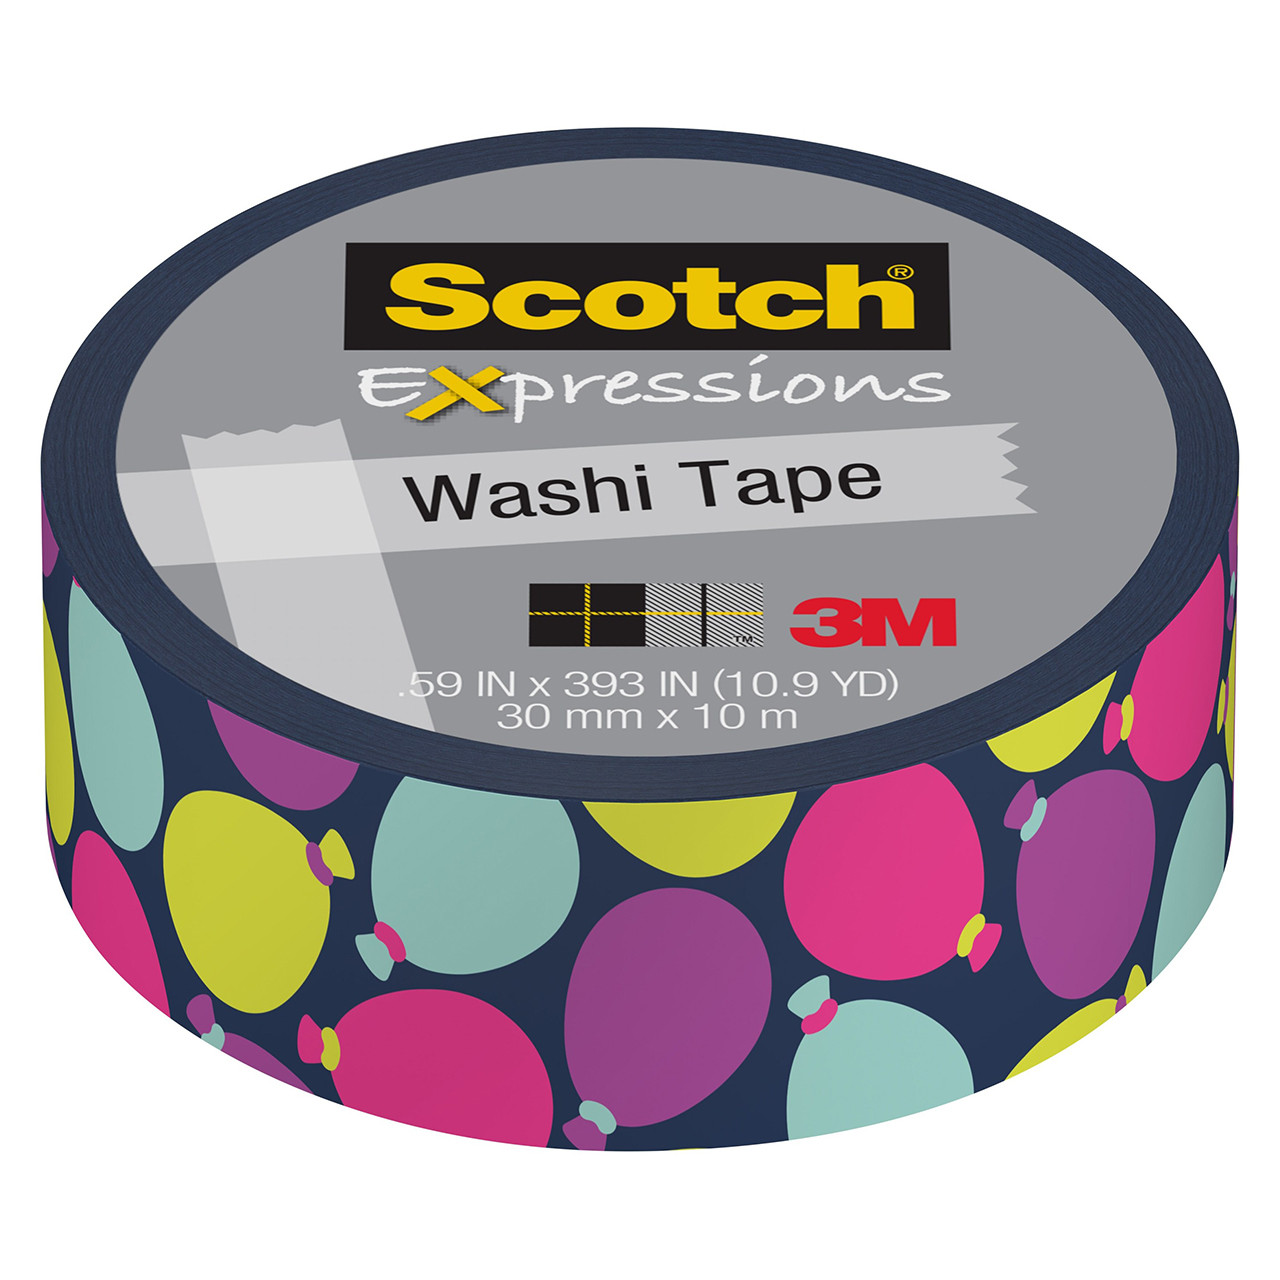 My Review: Scotch Expressions Washi Tape 